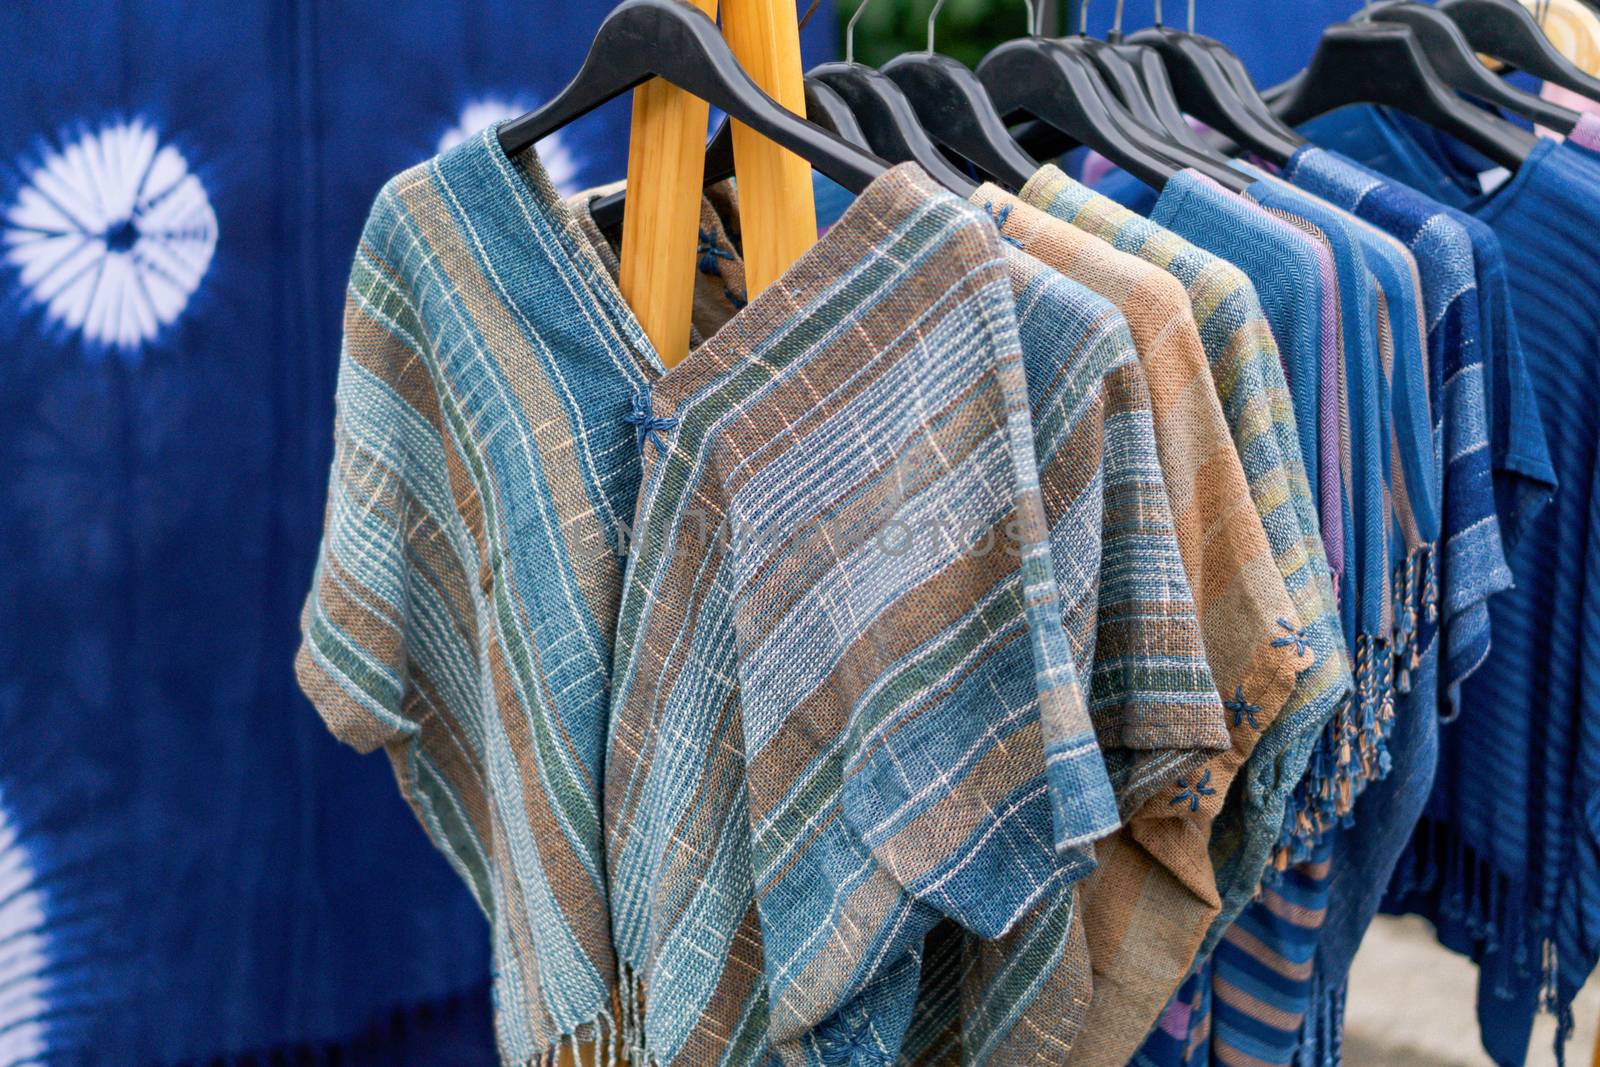 Close up T-shirt Indigo clothing is hand-woven in clothes rack at walking street, selective focus